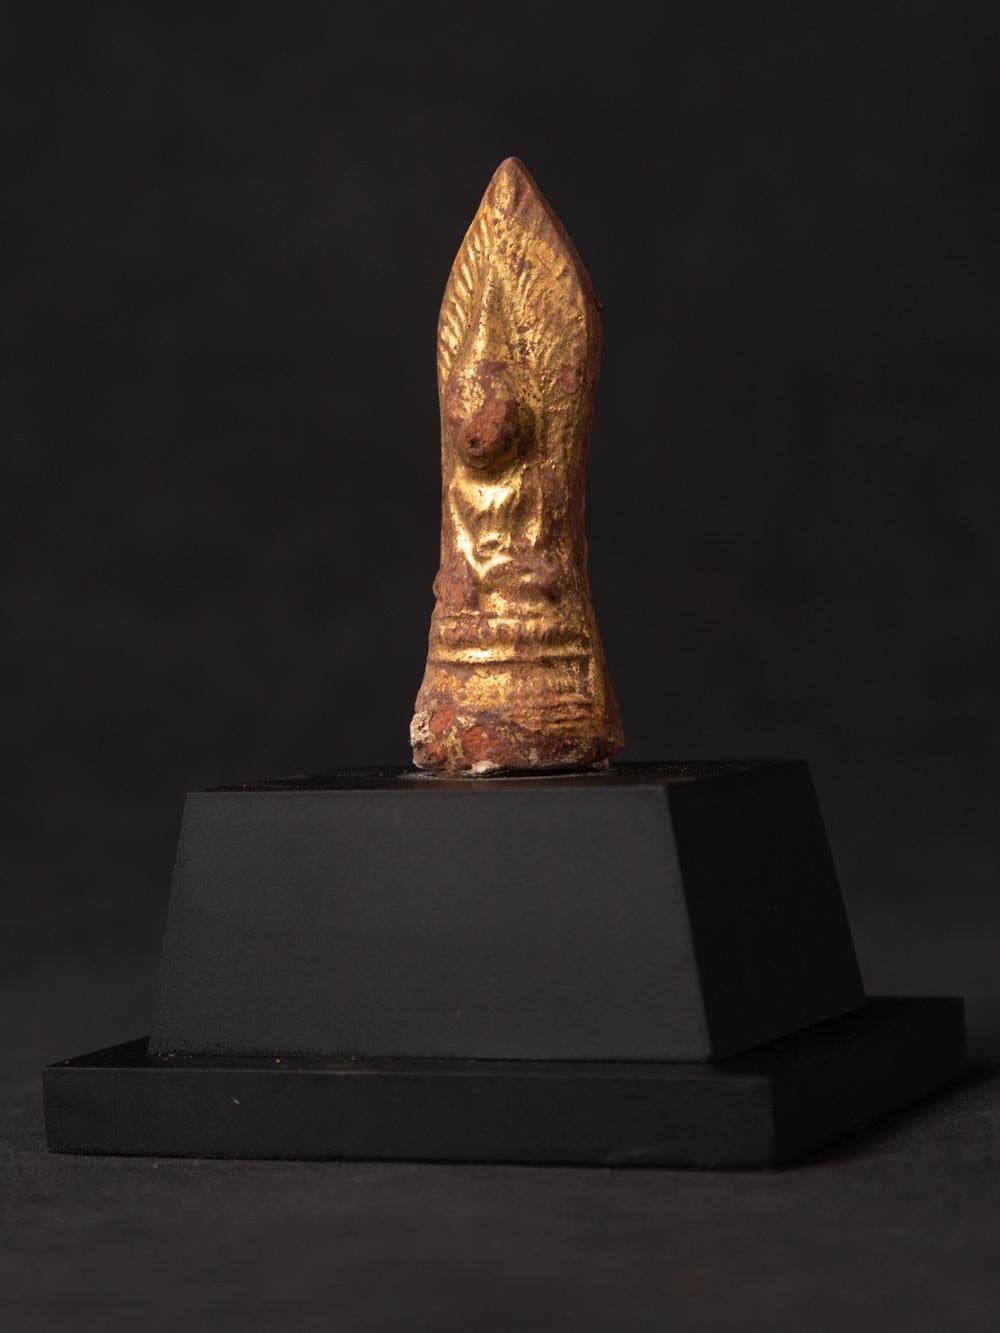 Material: Terracotta
11,5 cm high
The base is 9,2 cm wide and 7,2 cm deep
The amulet itself (without the base) is 7,5 cm high
Shan (Tai Yai) style
Bhumisparsha mudra
19th century
Weight: 163 grams
Originating from Burma
Nr: AML-09